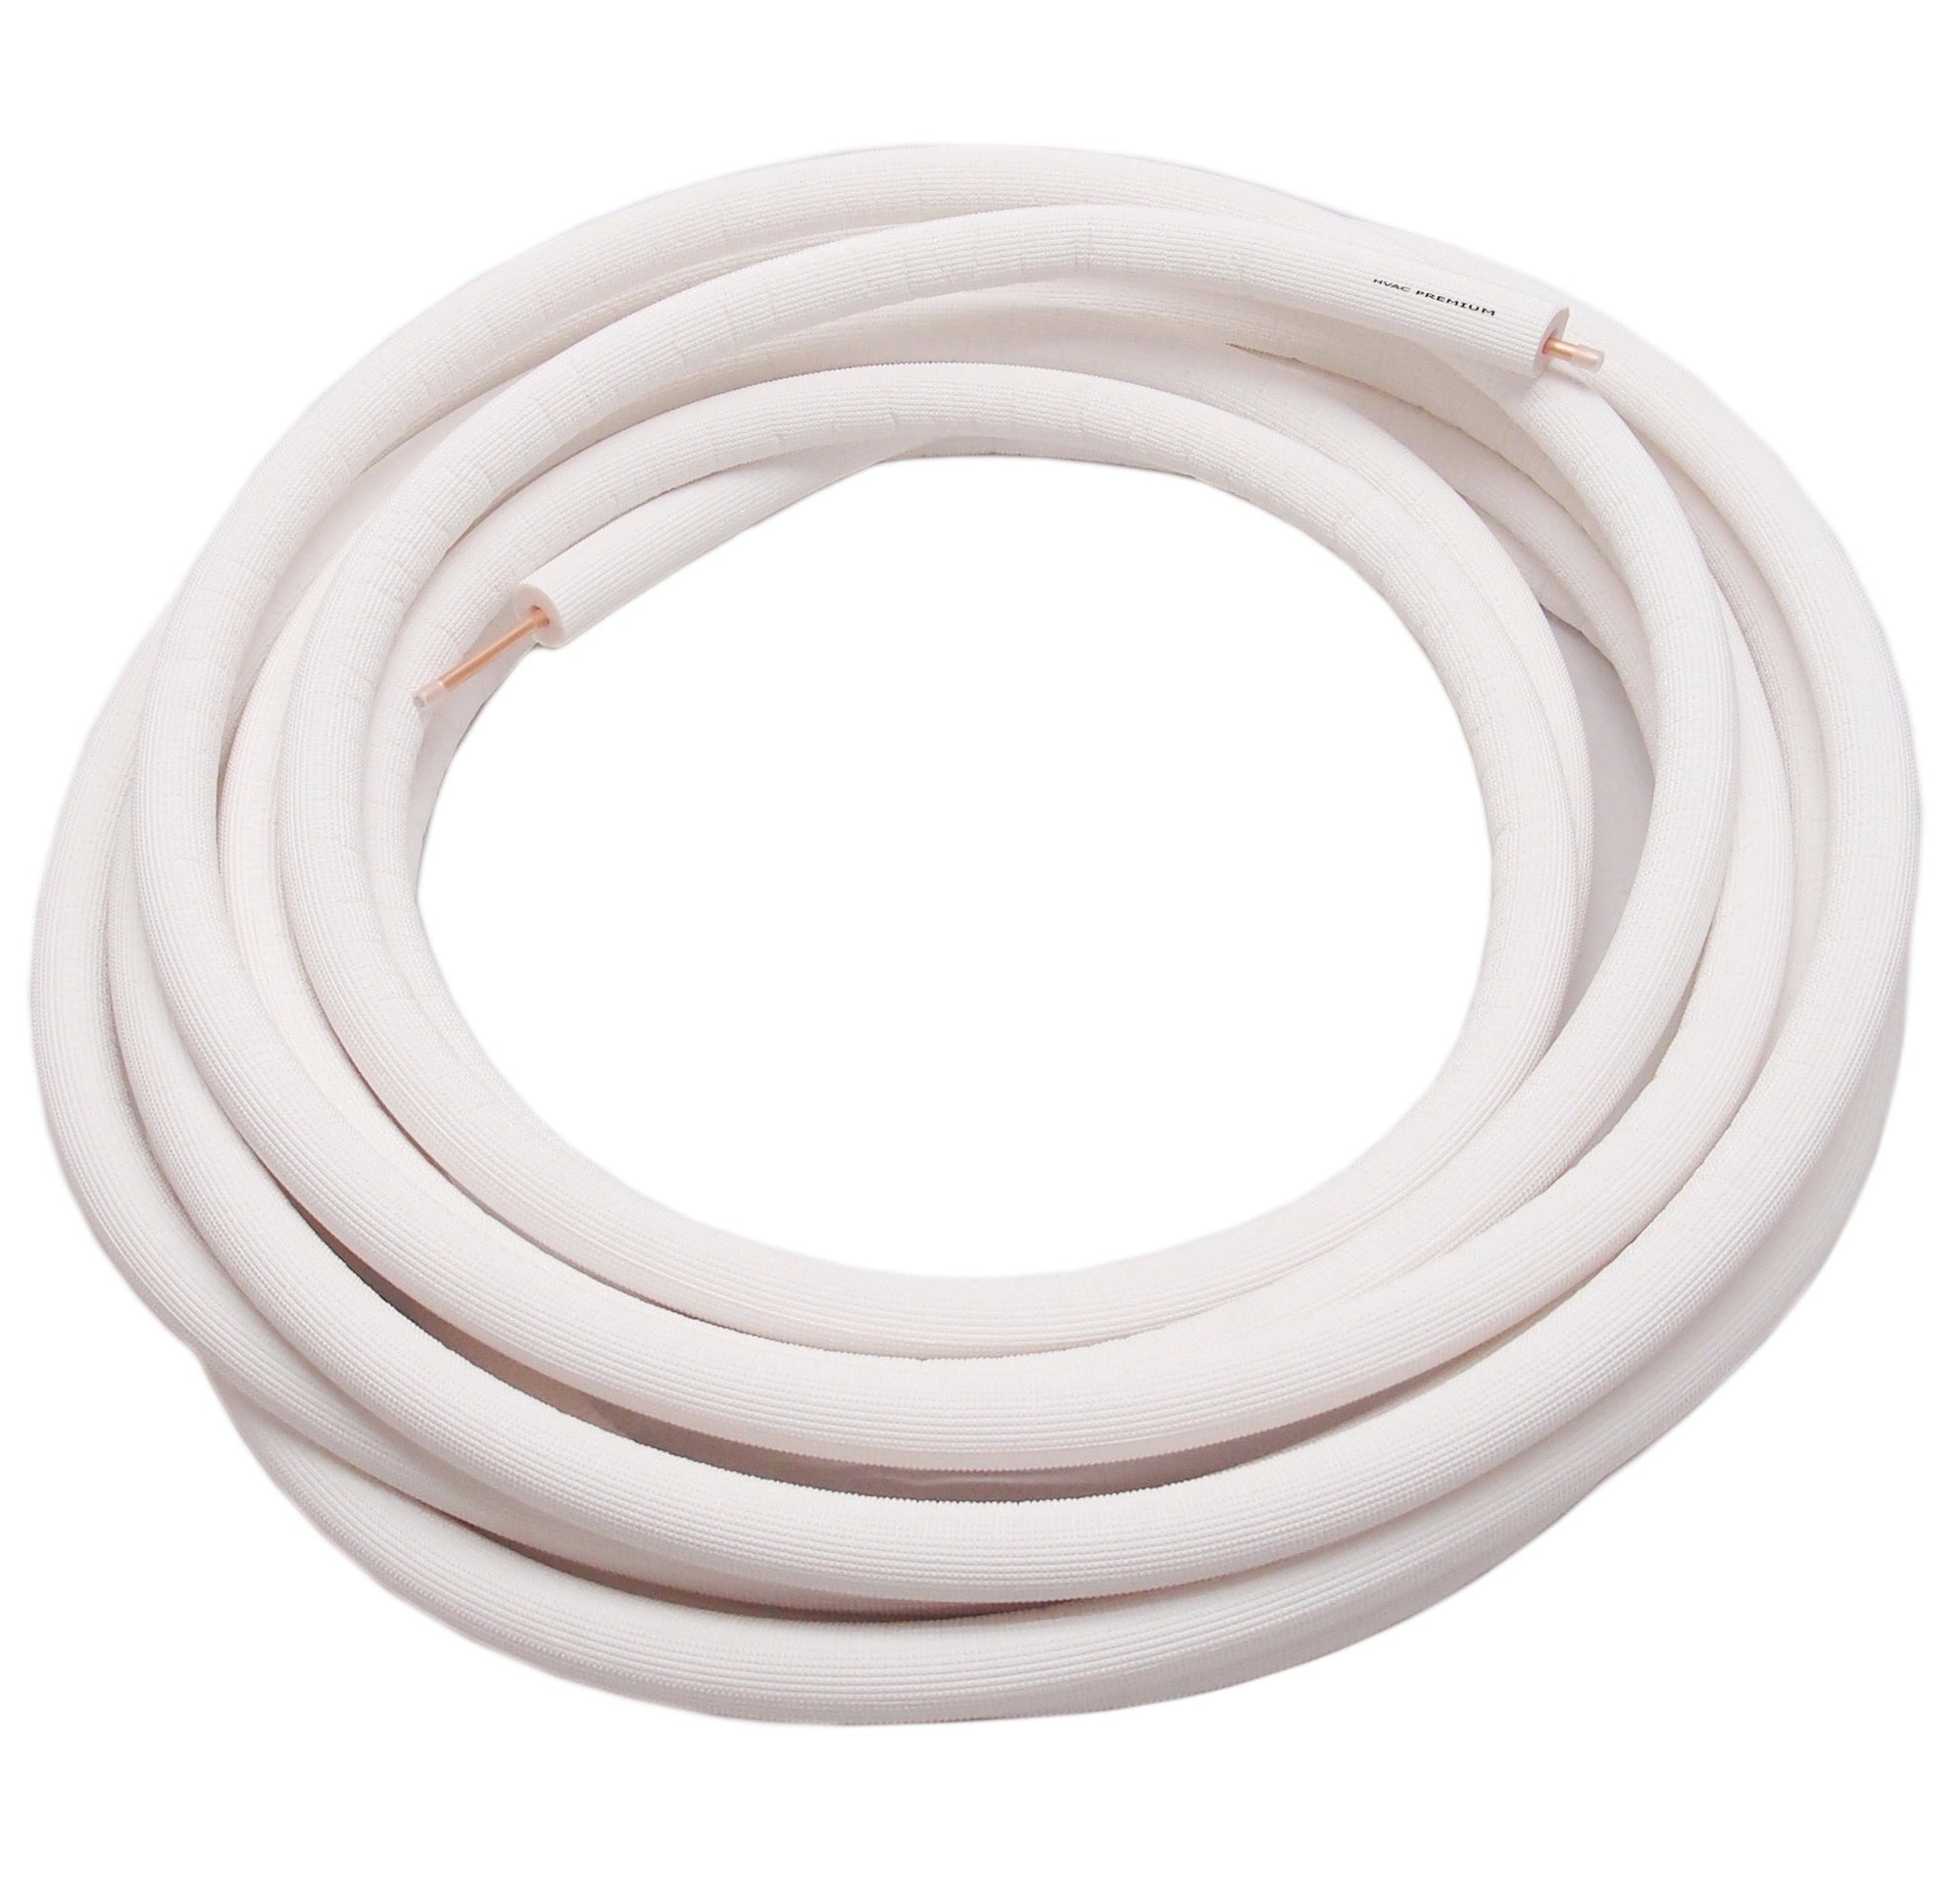 3/8" Insulated Copper Coil Line - Seamless Pipe Tube for HVAC, Refrigerant - 1/2" White Insulation - 15' Long